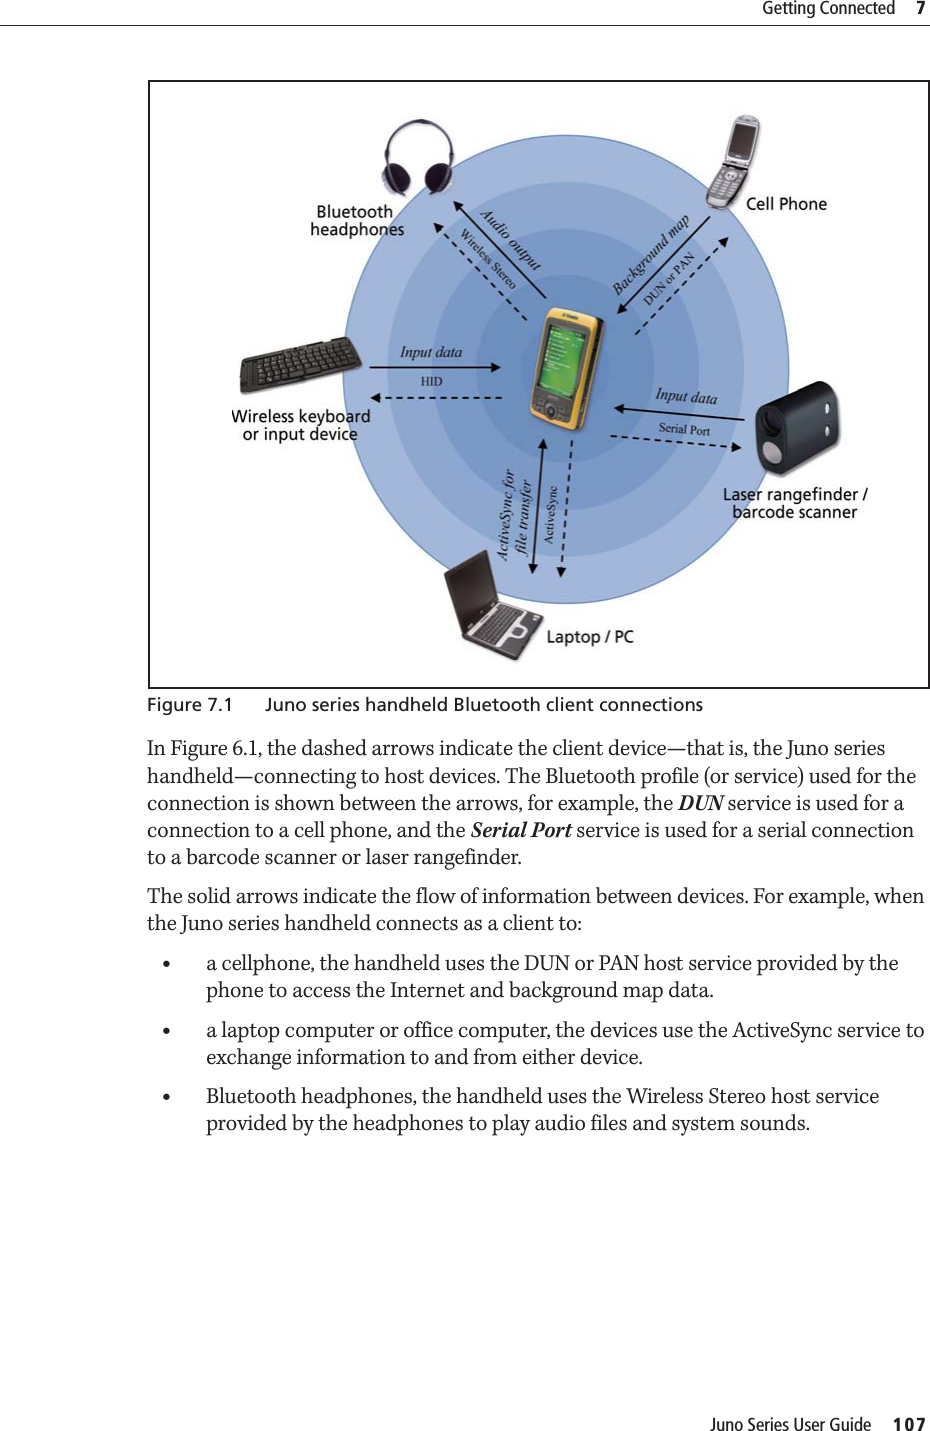 Juno Series User Guide     107Getting Connected     7 Figure 7.1 Juno series handheld Bluetooth client connectionsIn Figure 6.1, the dashed arrows indicate the client device—that is, the Juno series handheld—connecting to host devices. The Bluetooth profile (or service) used for the connection is shown between the arrows, for example, the DUN service is used for a connection to a cell phone, and the Serial Port service is used for a serial connection to a barcode scanner or laser rangefinder. The solid arrows indicate the flow of information between devices. For example, when the Juno series handheld connects as a client to:•a cellphone, the handheld uses the DUN or PAN host service provided by the phone to access the Internet and background map data.•a laptop computer or office computer, the devices use the ActiveSync service to exchange information to and from either device.  •Bluetooth headphones, the handheld uses the Wireless Stereo host service provided by the headphones to play audio files and system sounds.